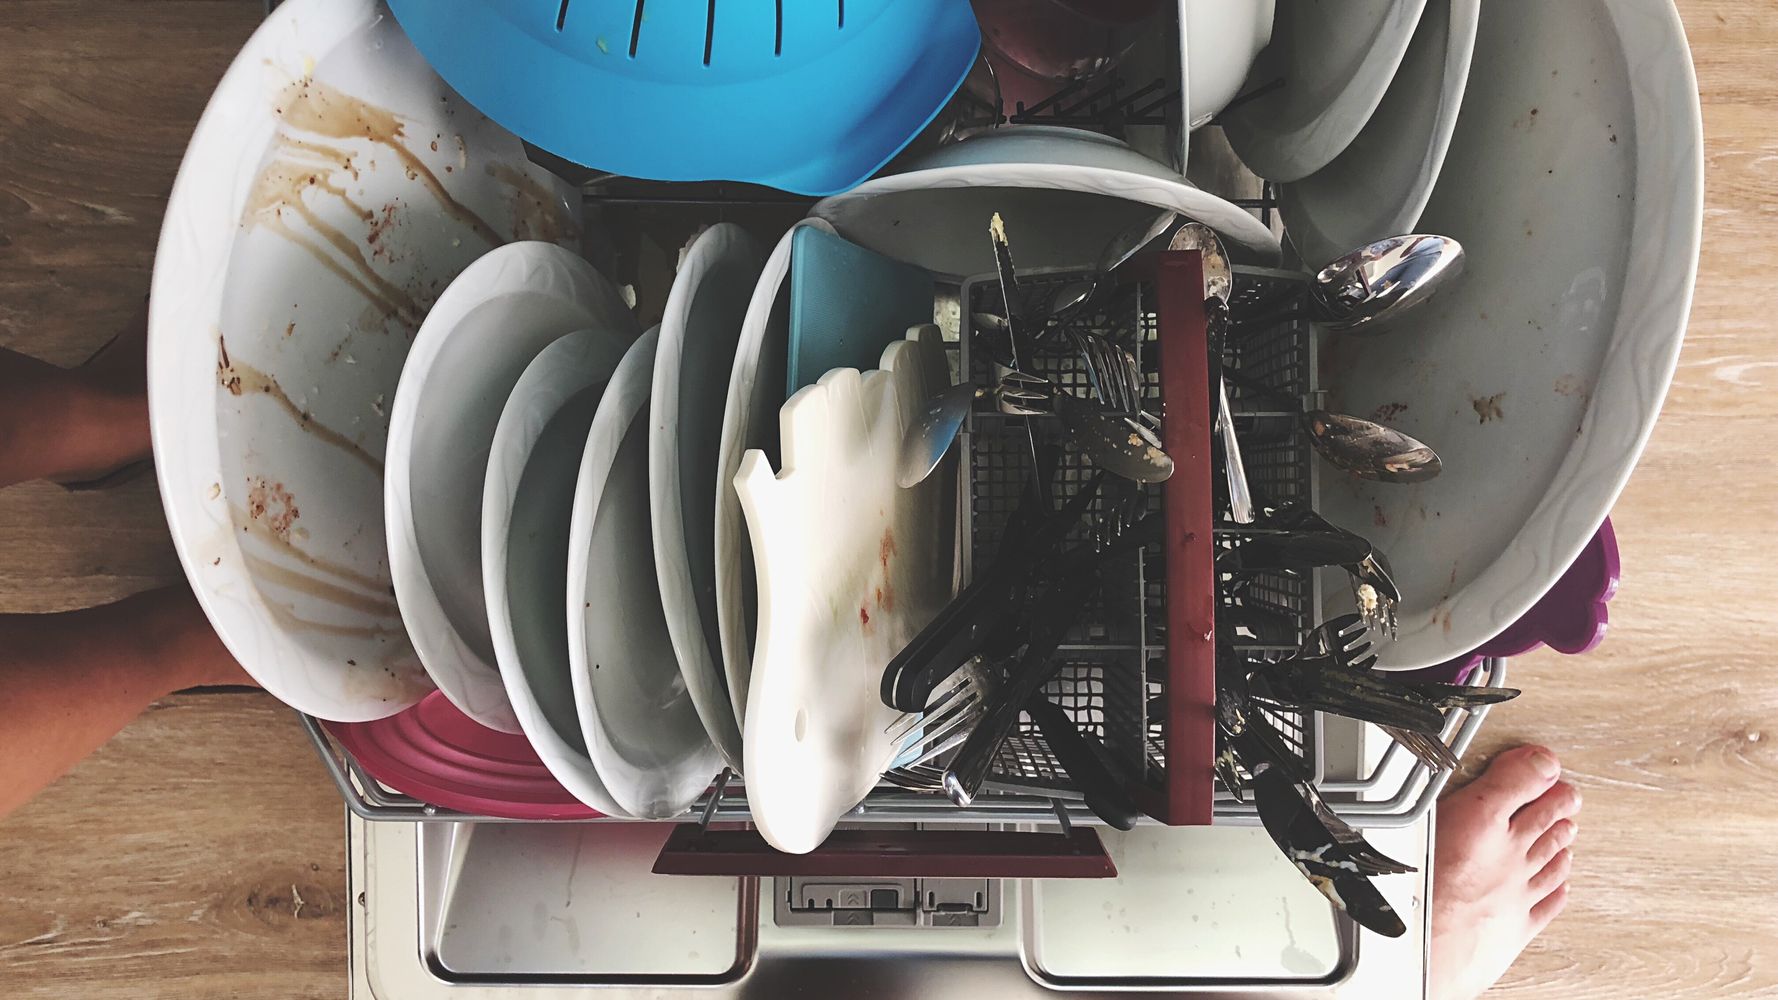 Can You Put Pots and Pans in a Dishwasher? - Simply Better Living